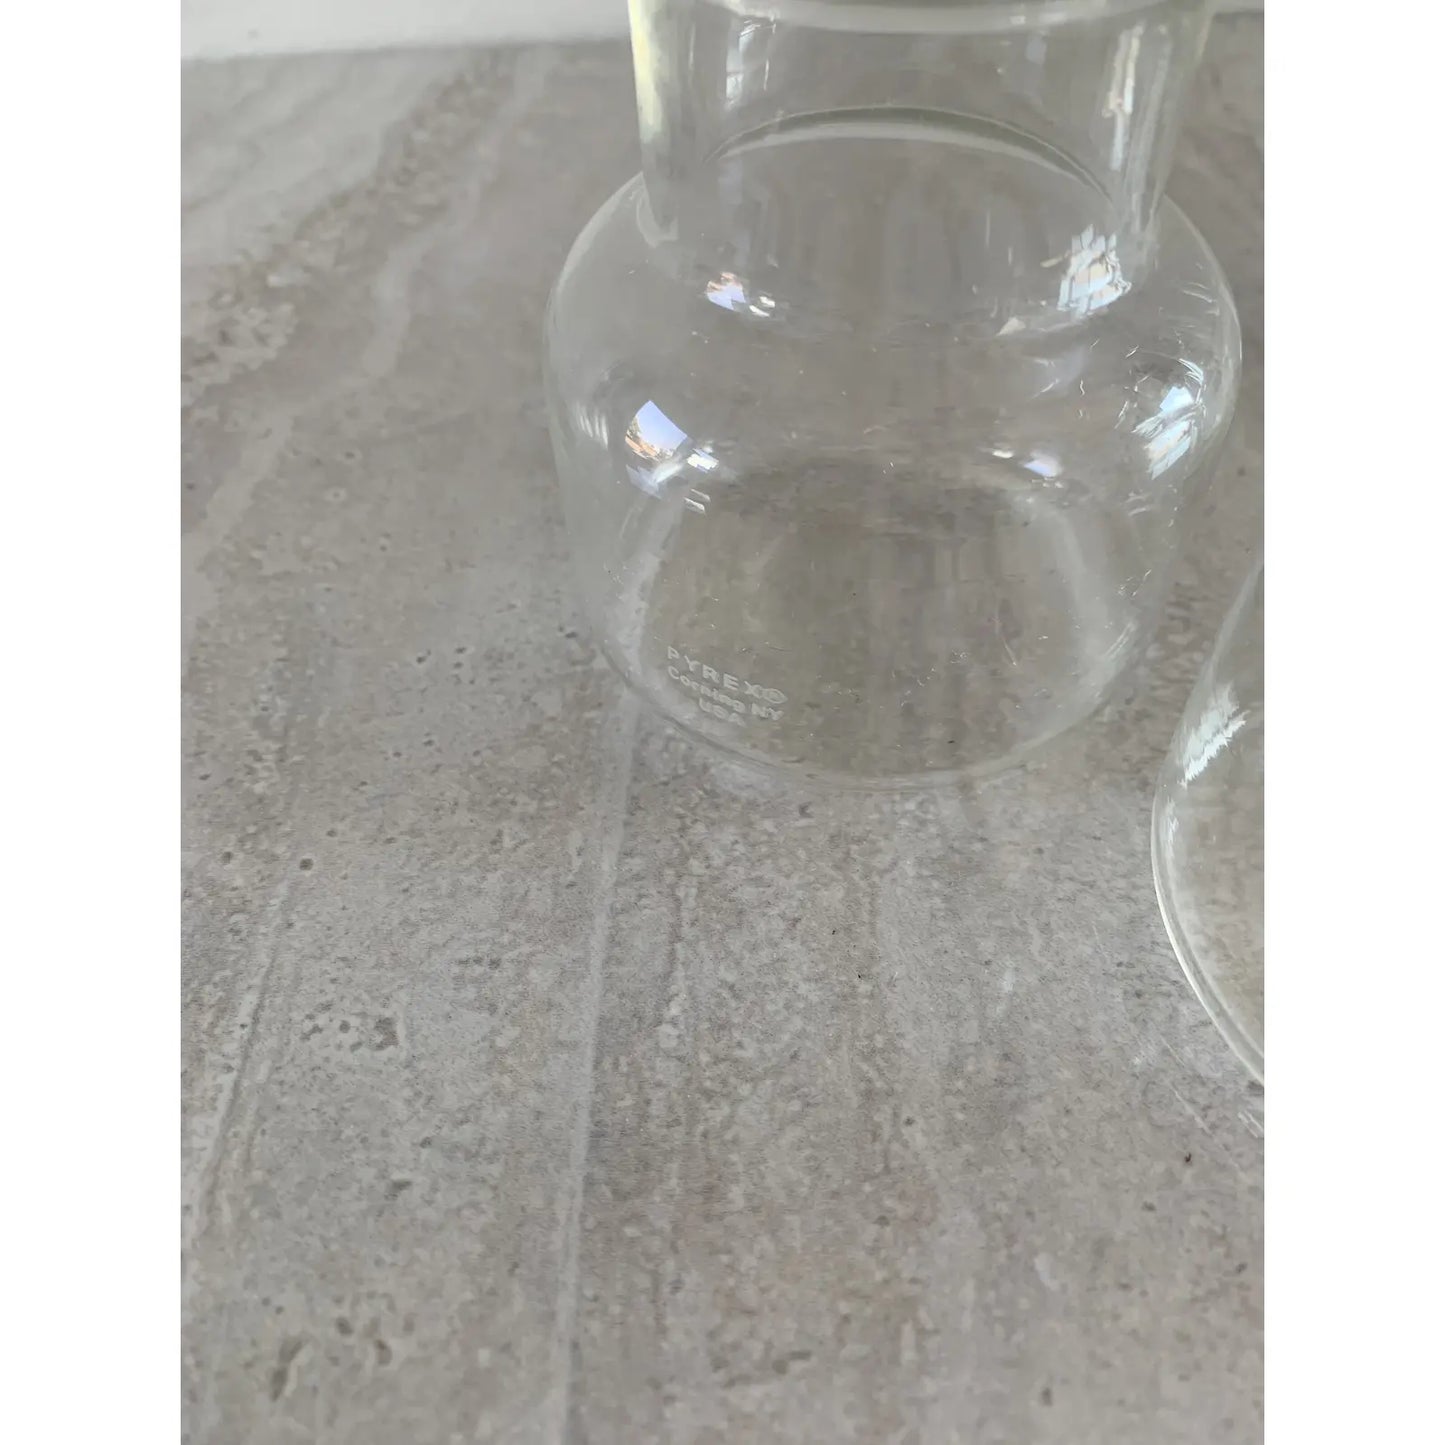 Pyrex Glass Candle Holder Vases - Set of Three